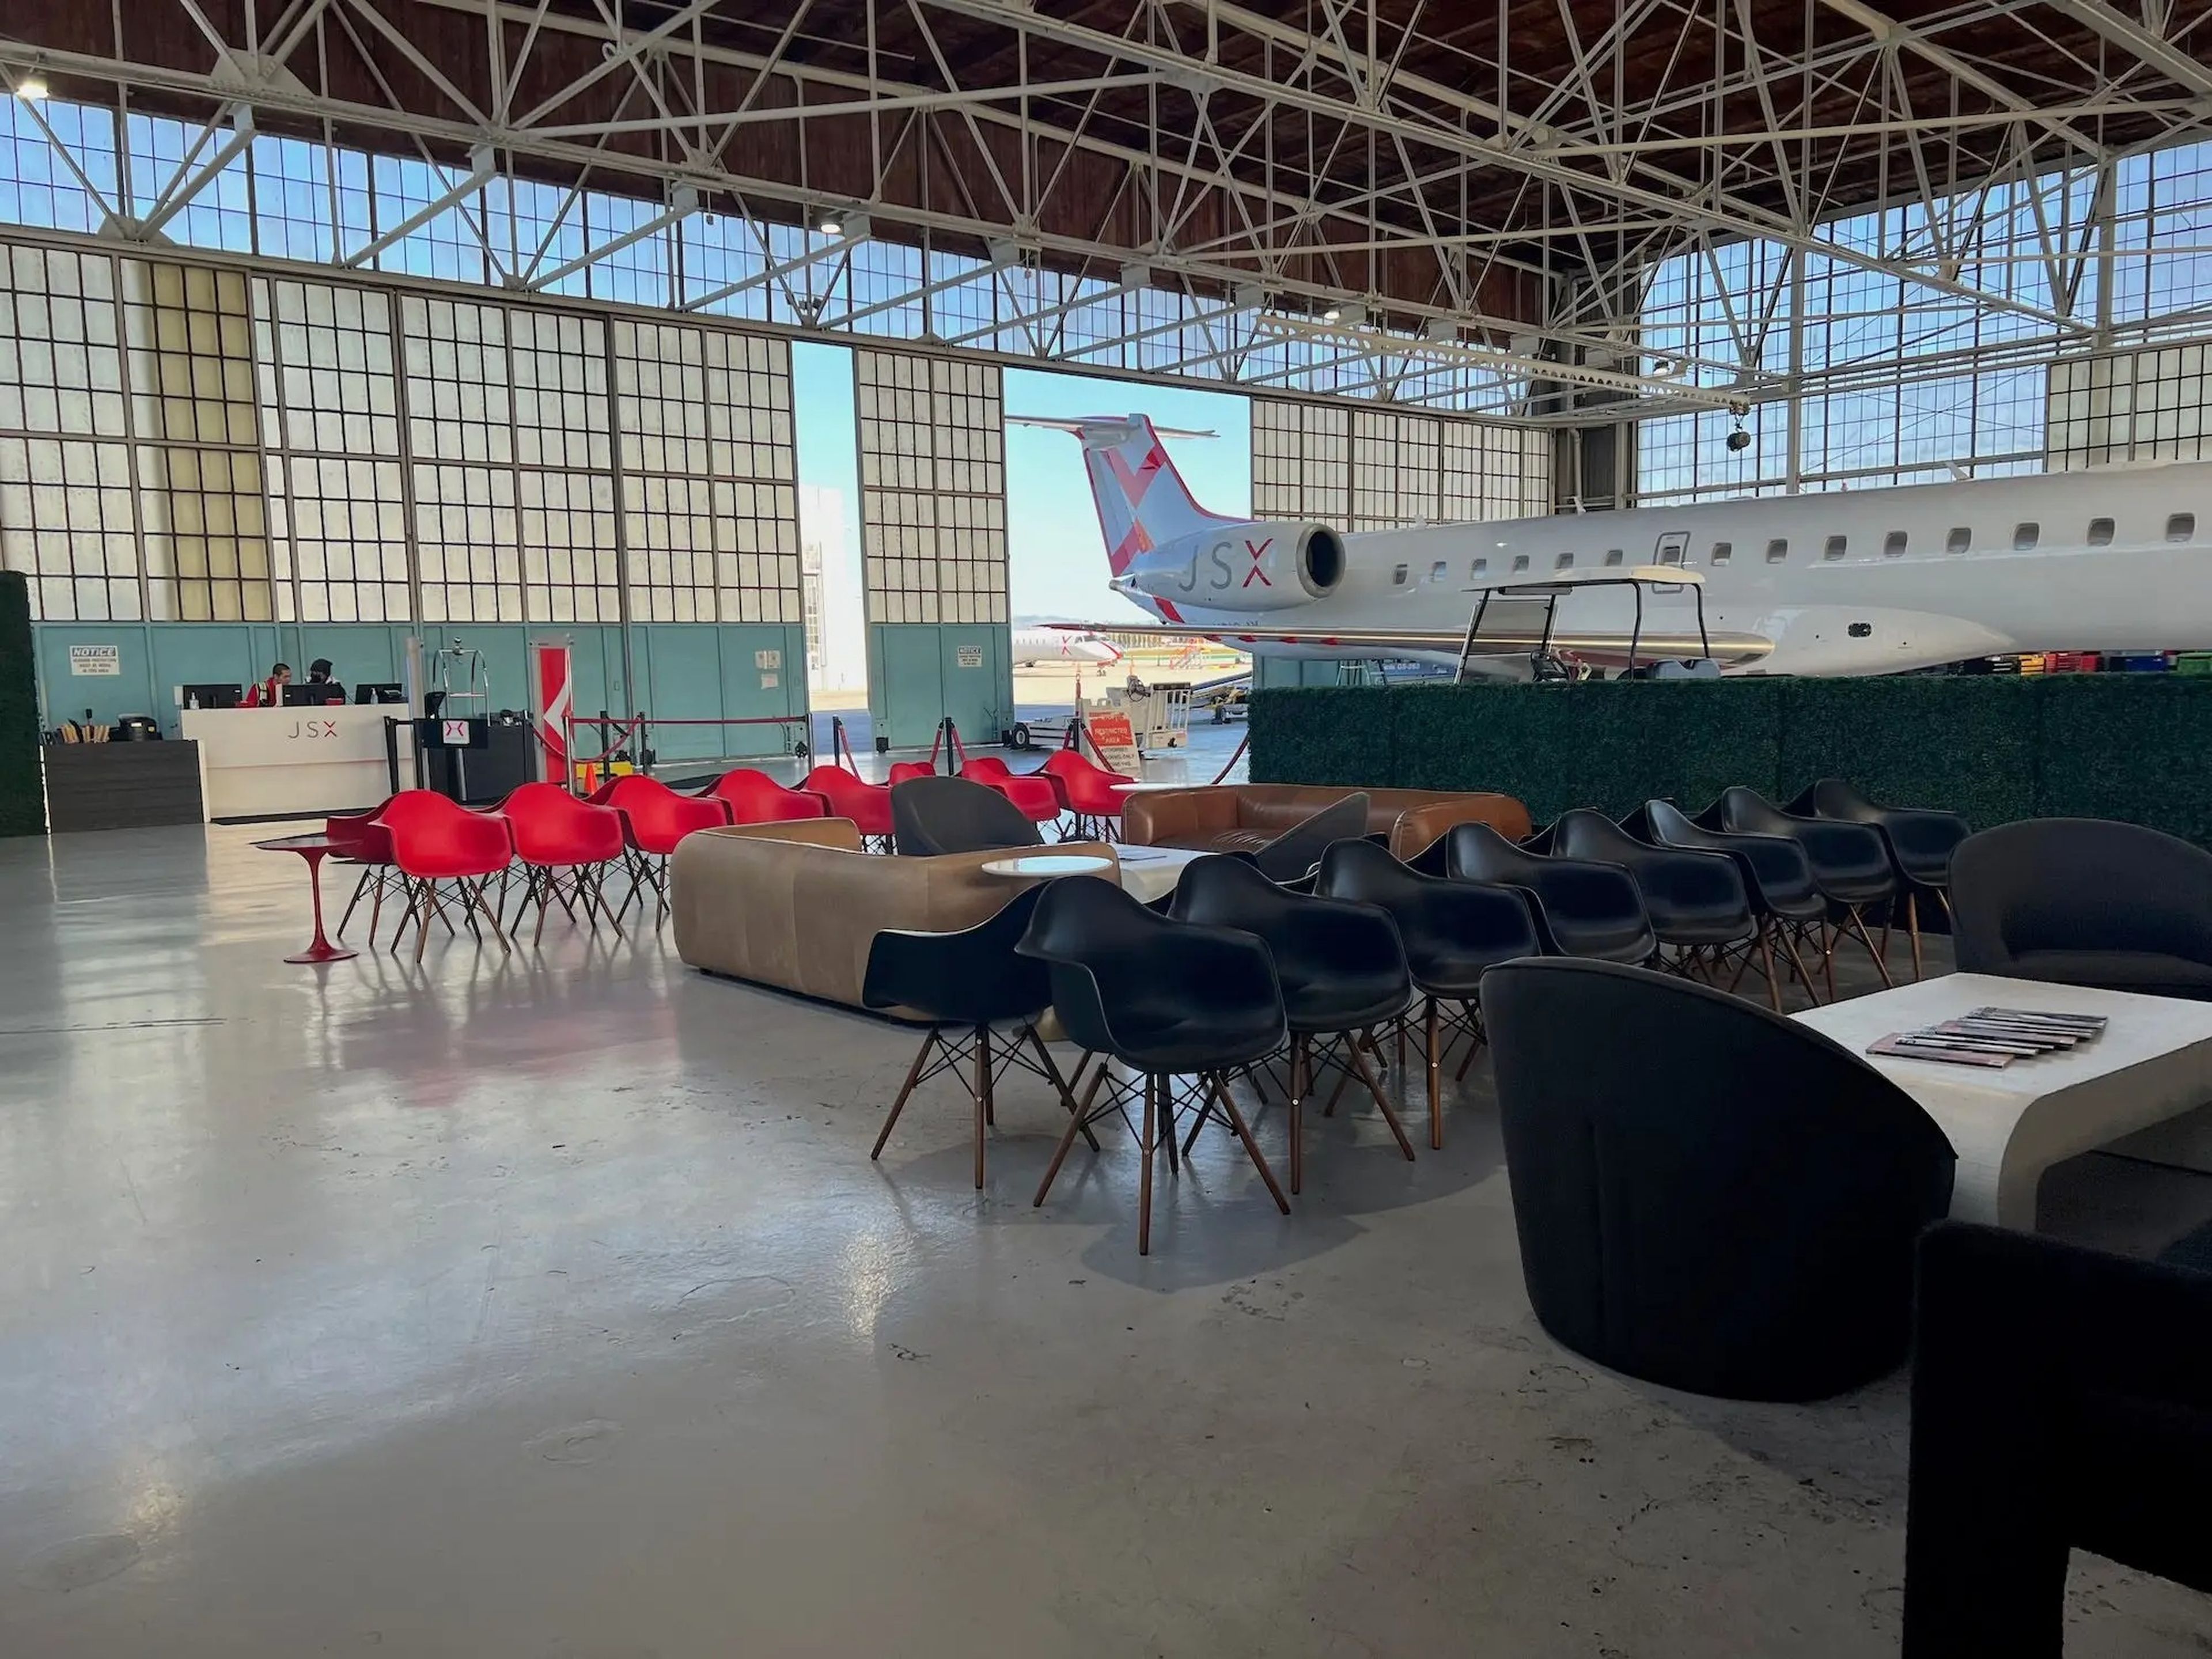 A hangar full of chairs and a white JSX branded aircraft.